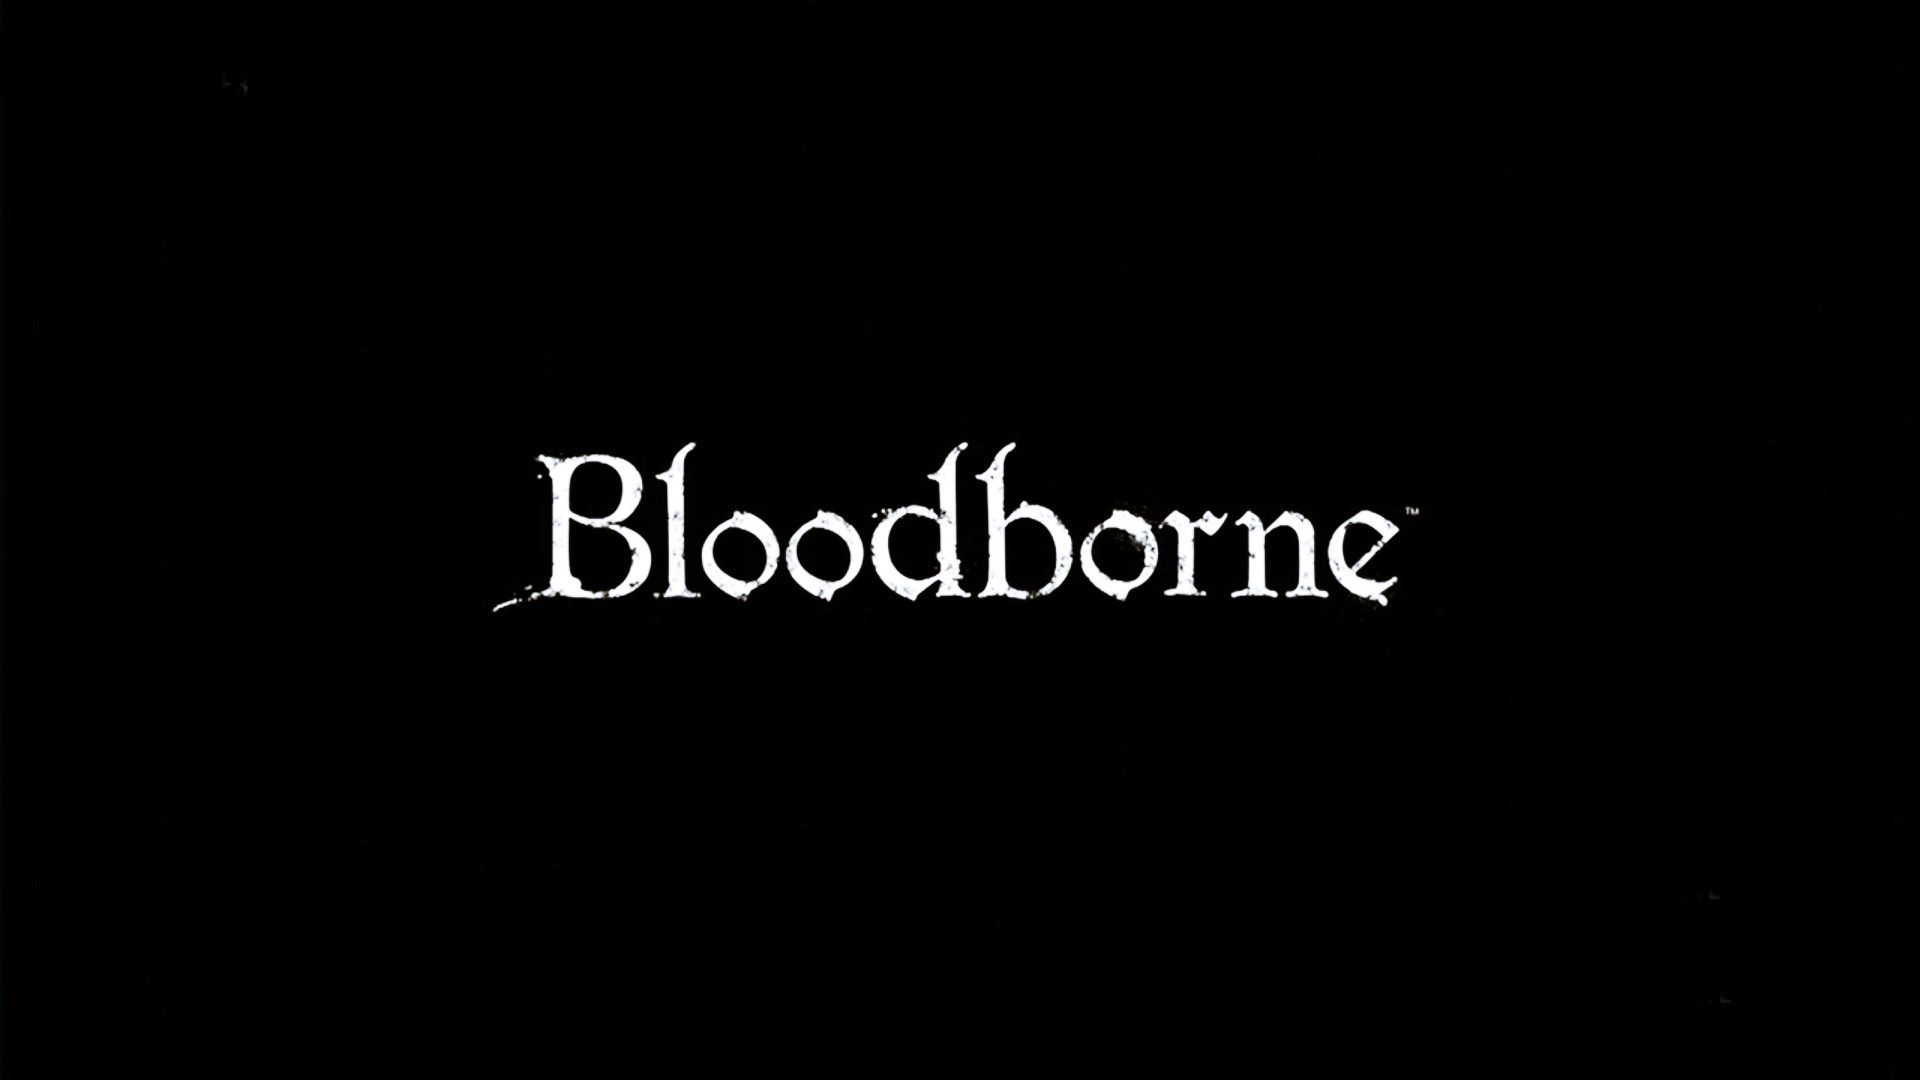 Bloodborne Video Game 14 Cool Hd Wallpaper. Gaming Access Weekly